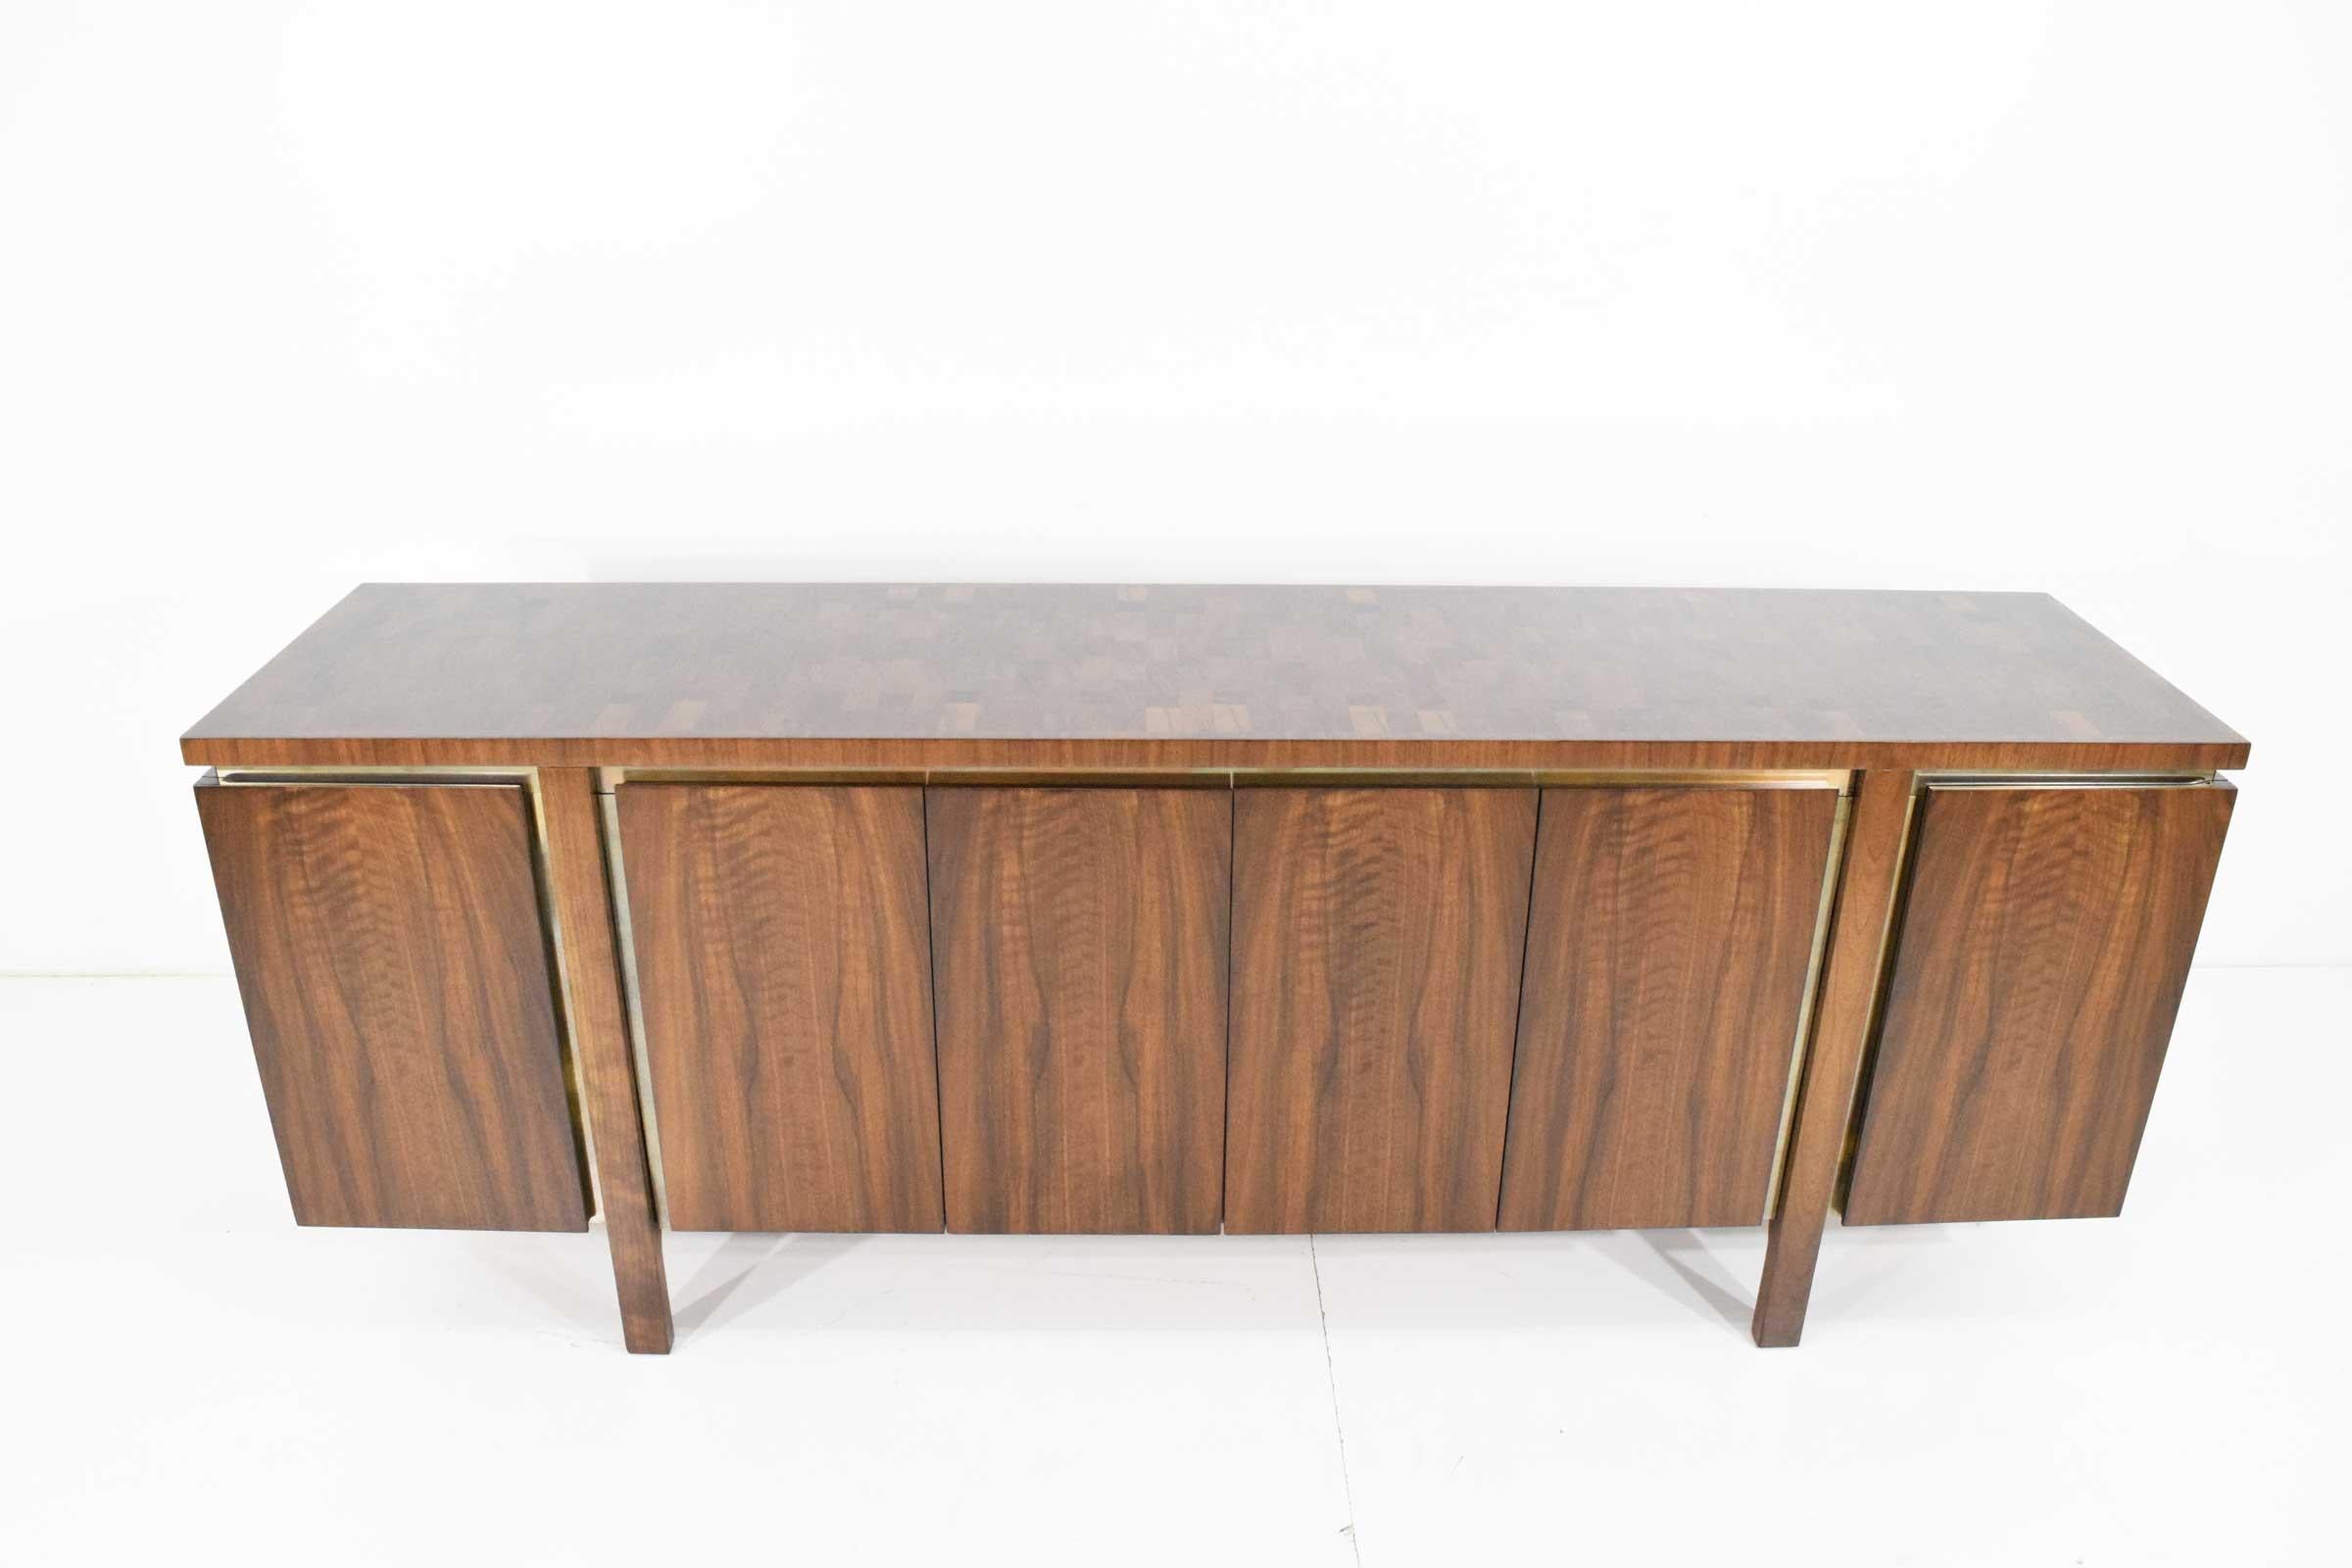 A beautifully restored credenza by John Widdicomb in walnut. The credenza has four doors with a brass reveal behind the doors. Legs give the effect of floating.